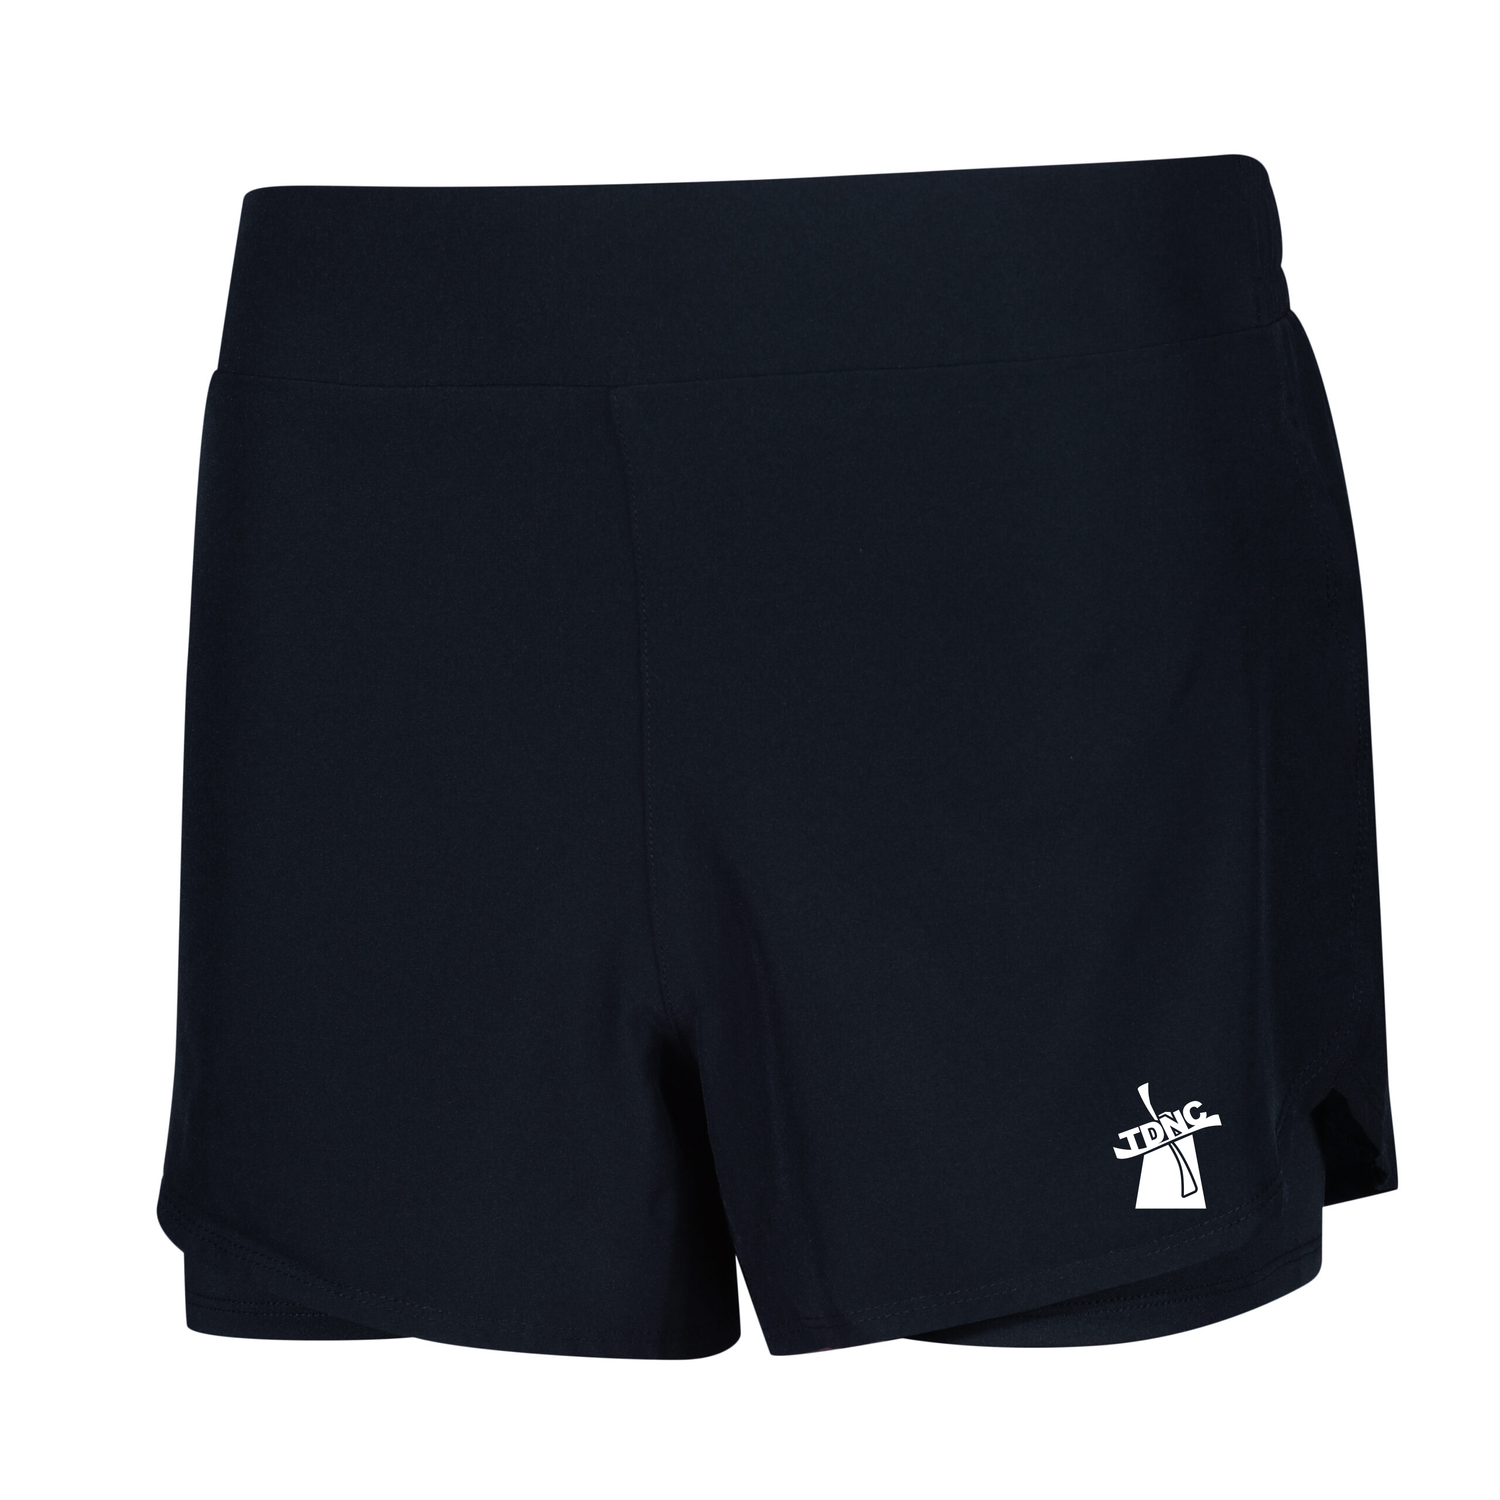 The Downs training shorts